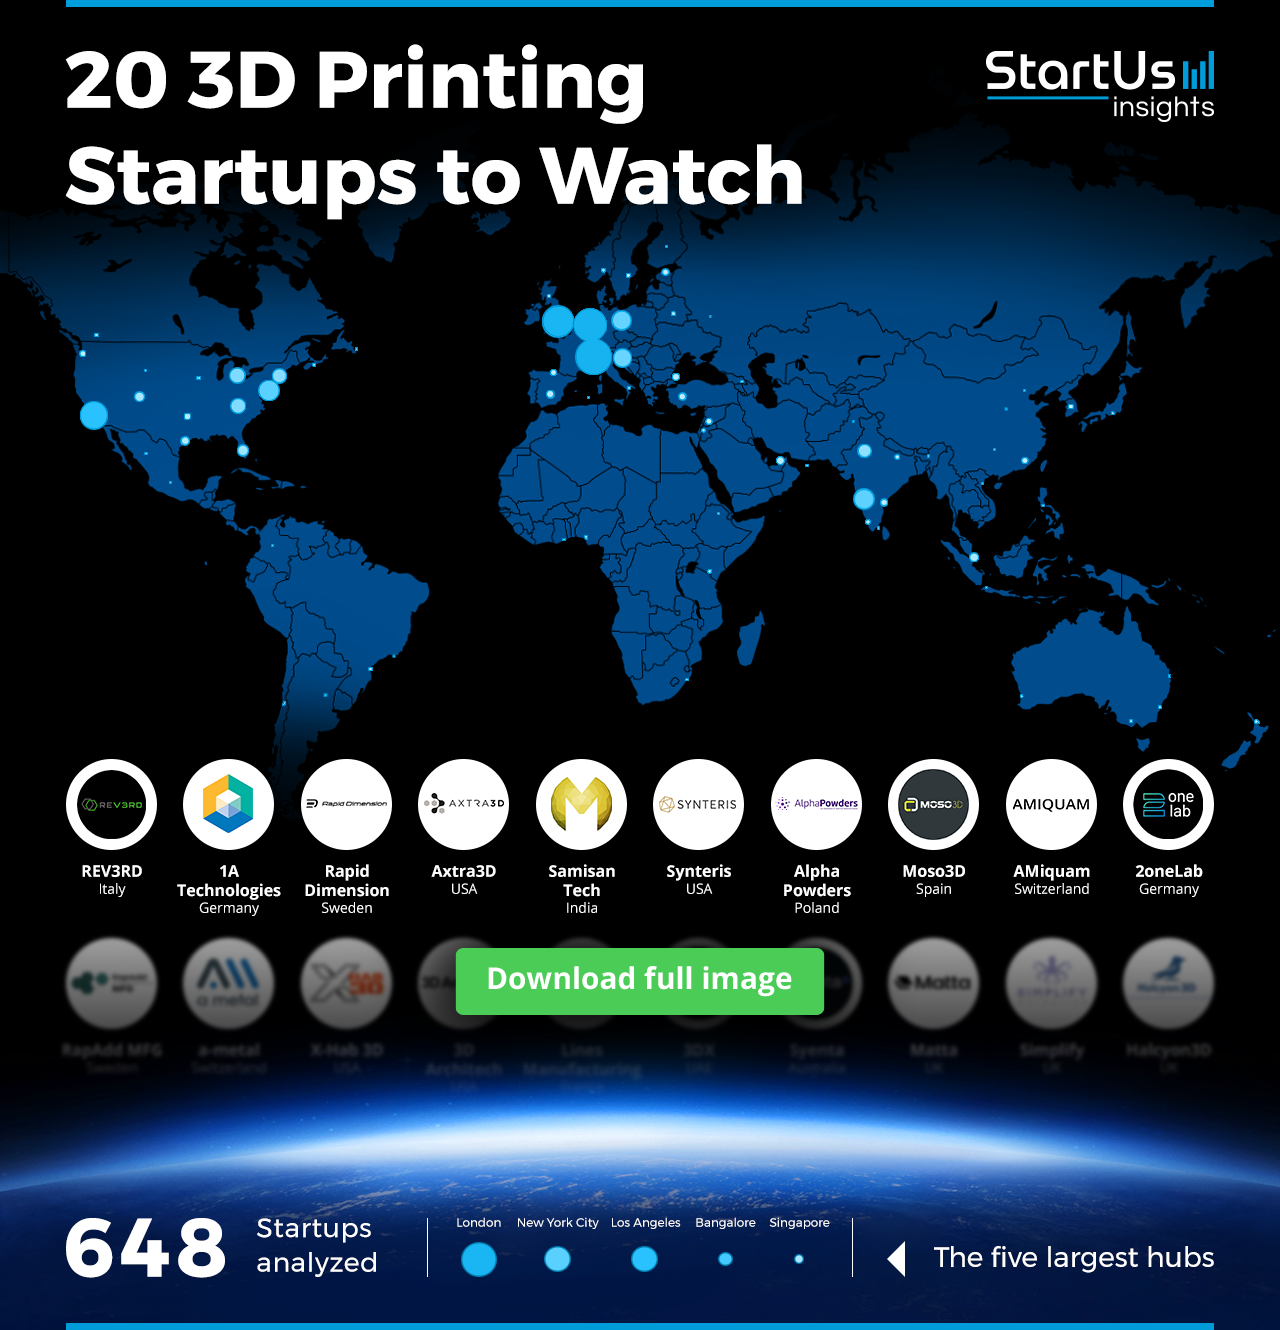 3D-Printing-Startups-to-Watch-Heat-Map-Blurred-StartUs-Insights-noresize